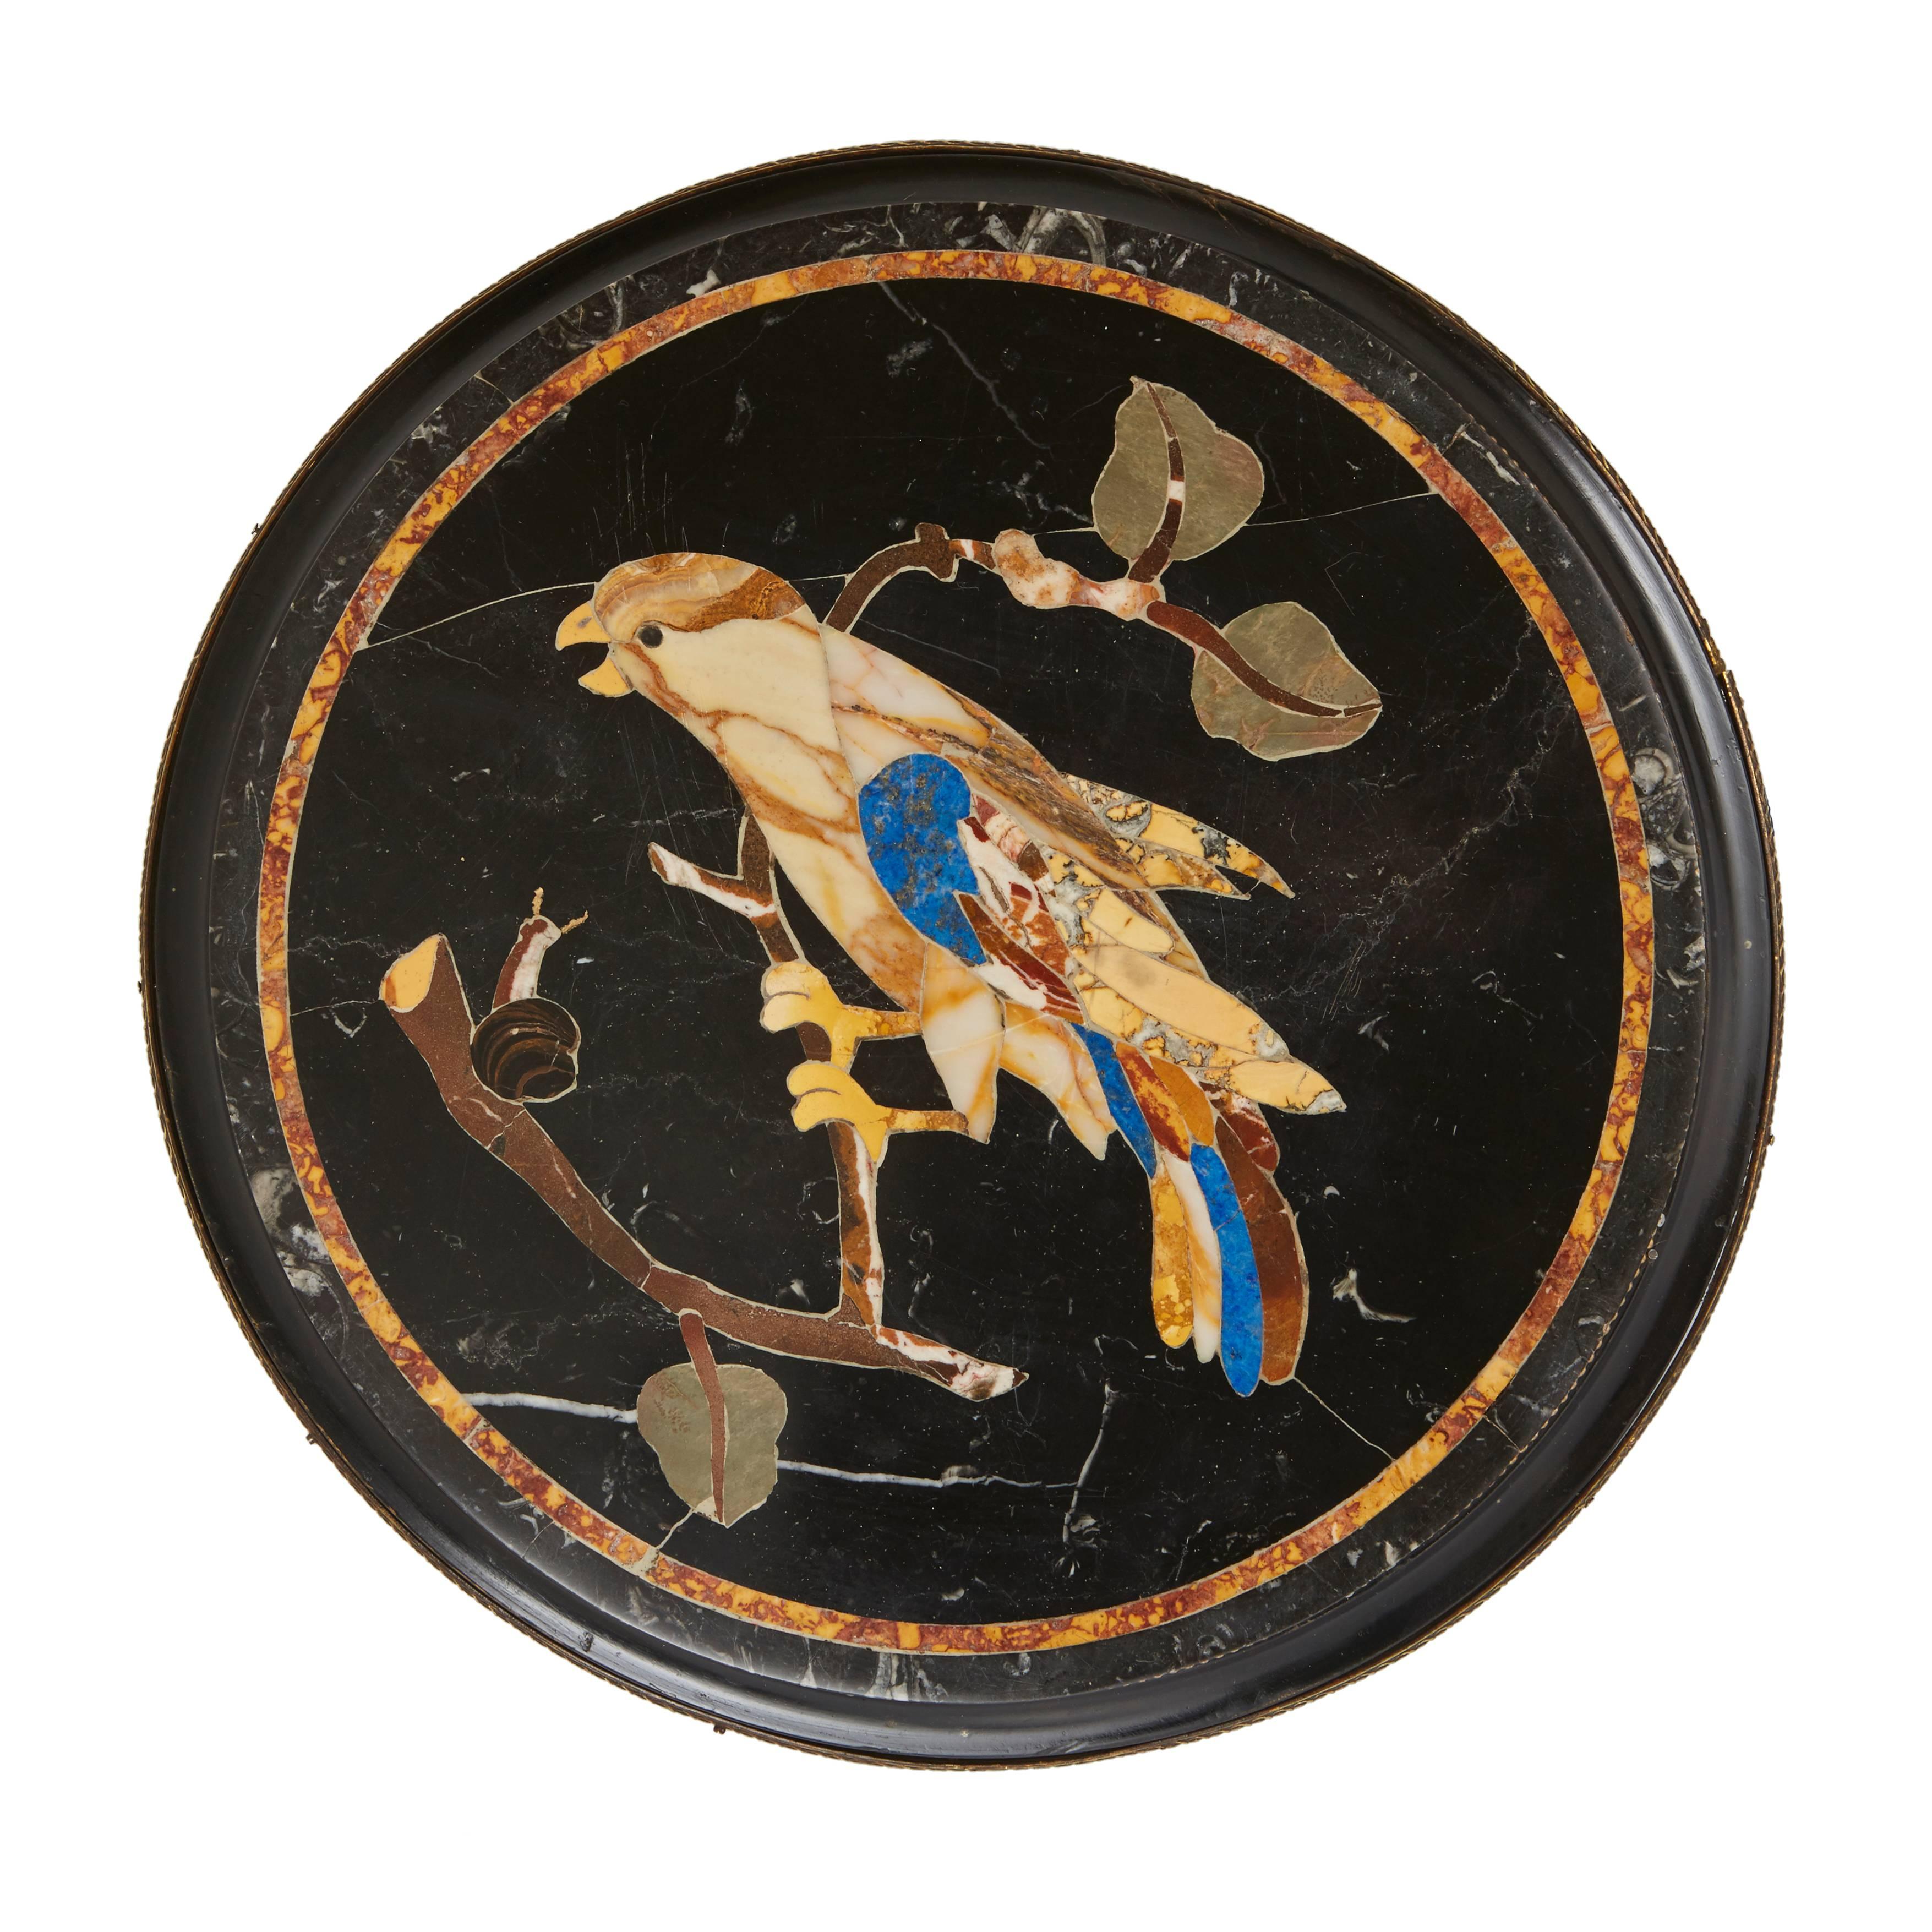 This fine pair of 19th century occasional tables exhibit an exceptional example of the marble Pietra Dura technique. Developed in 16th century Florence, this highly skilled form of inlay uses pieces of cut marble, which are placed seamlessly